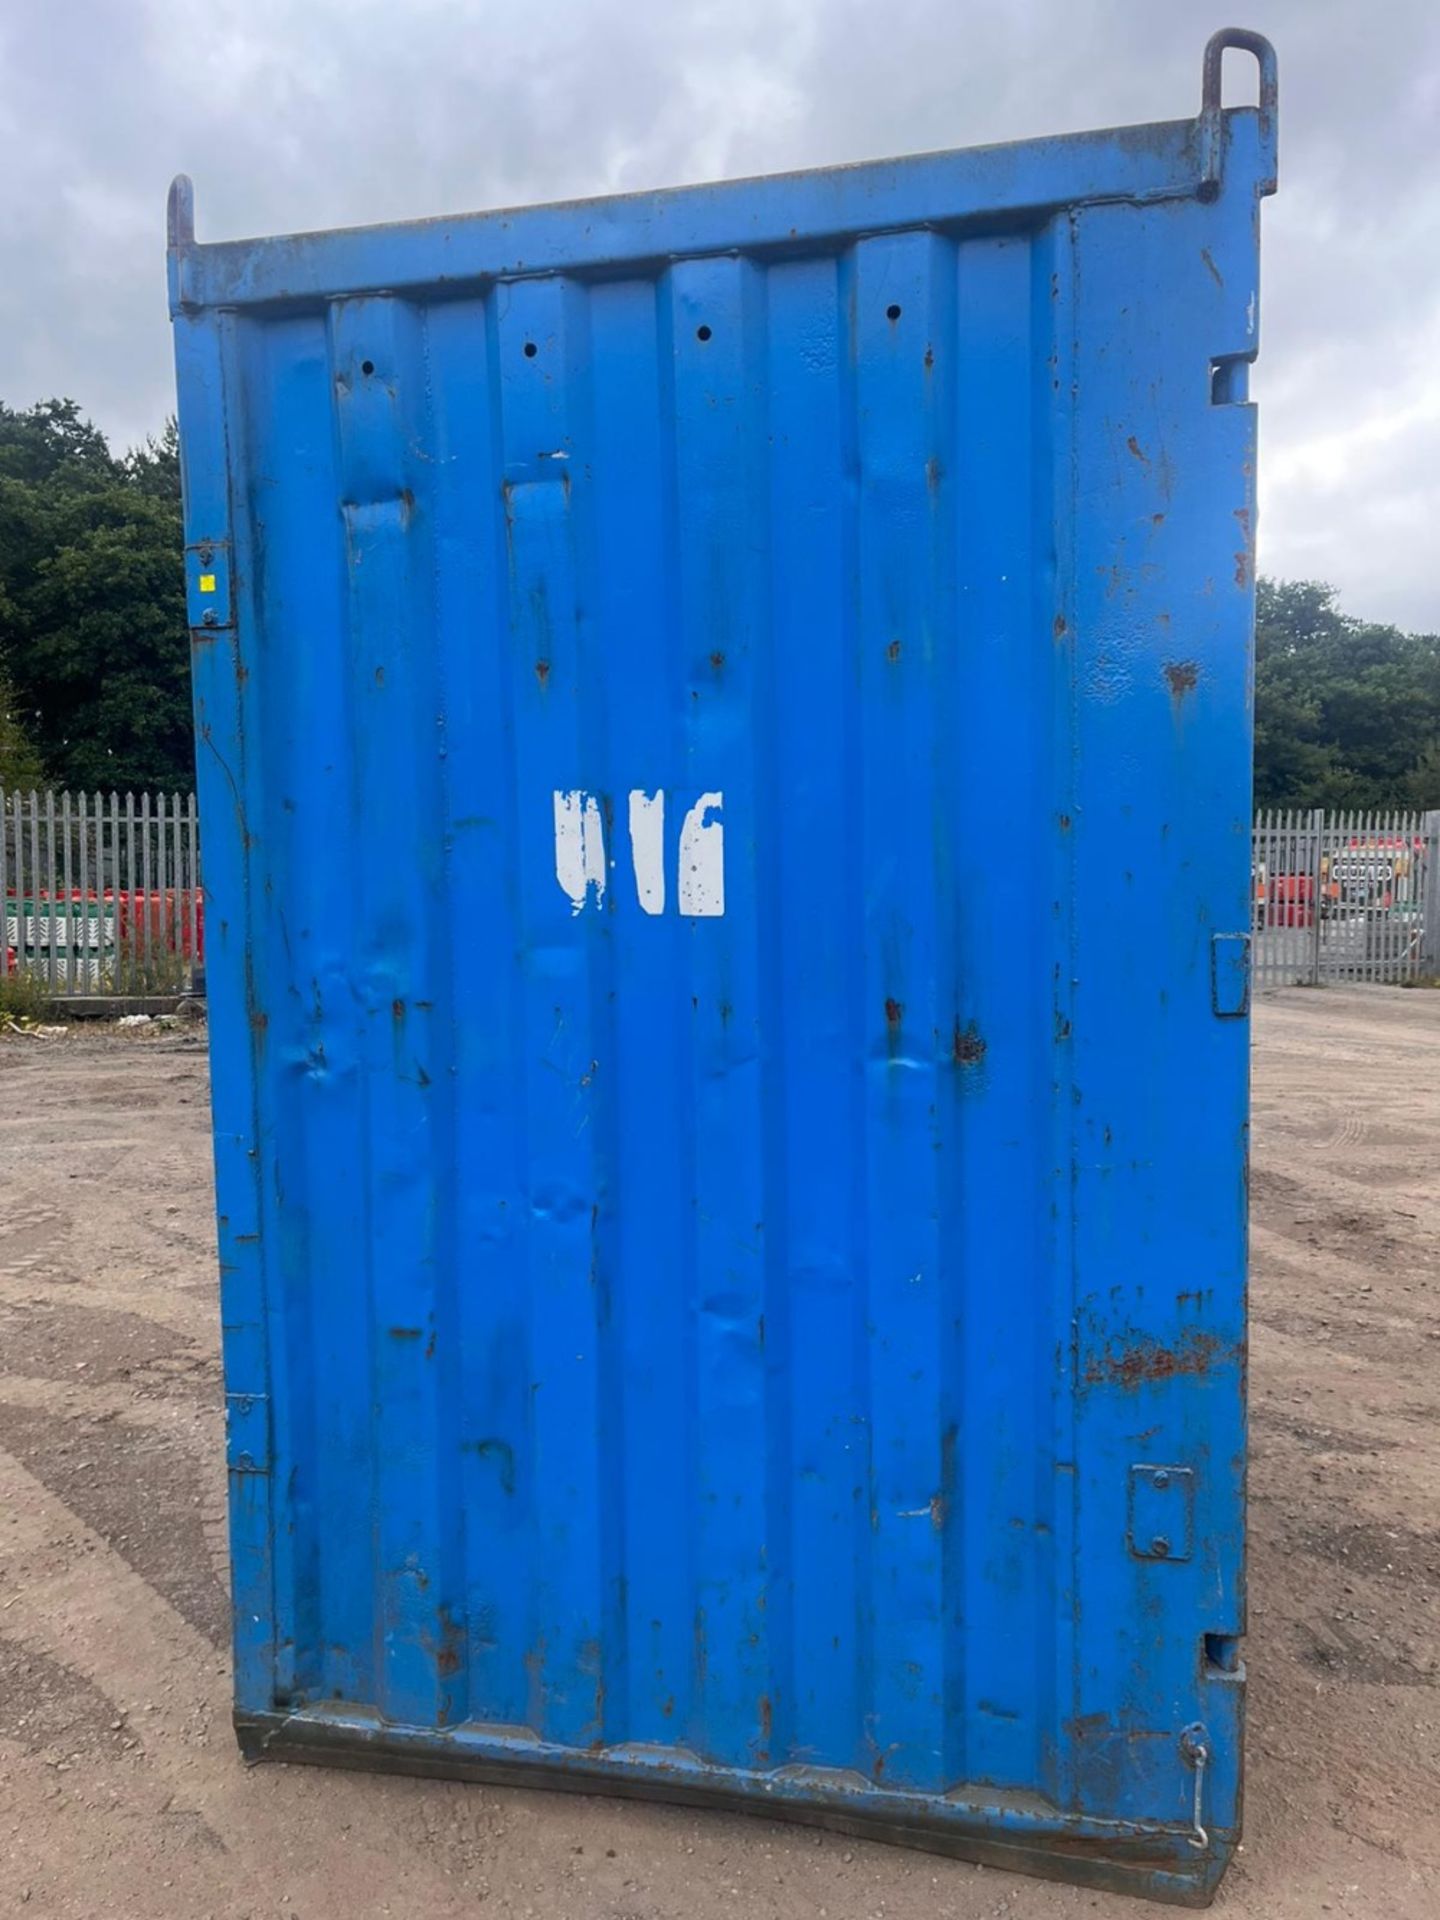 SECURE LOCKABLE STEEL VAULT CONTAINER 1.9X1.68 X2.6 METRES HIGH - Image 4 of 6